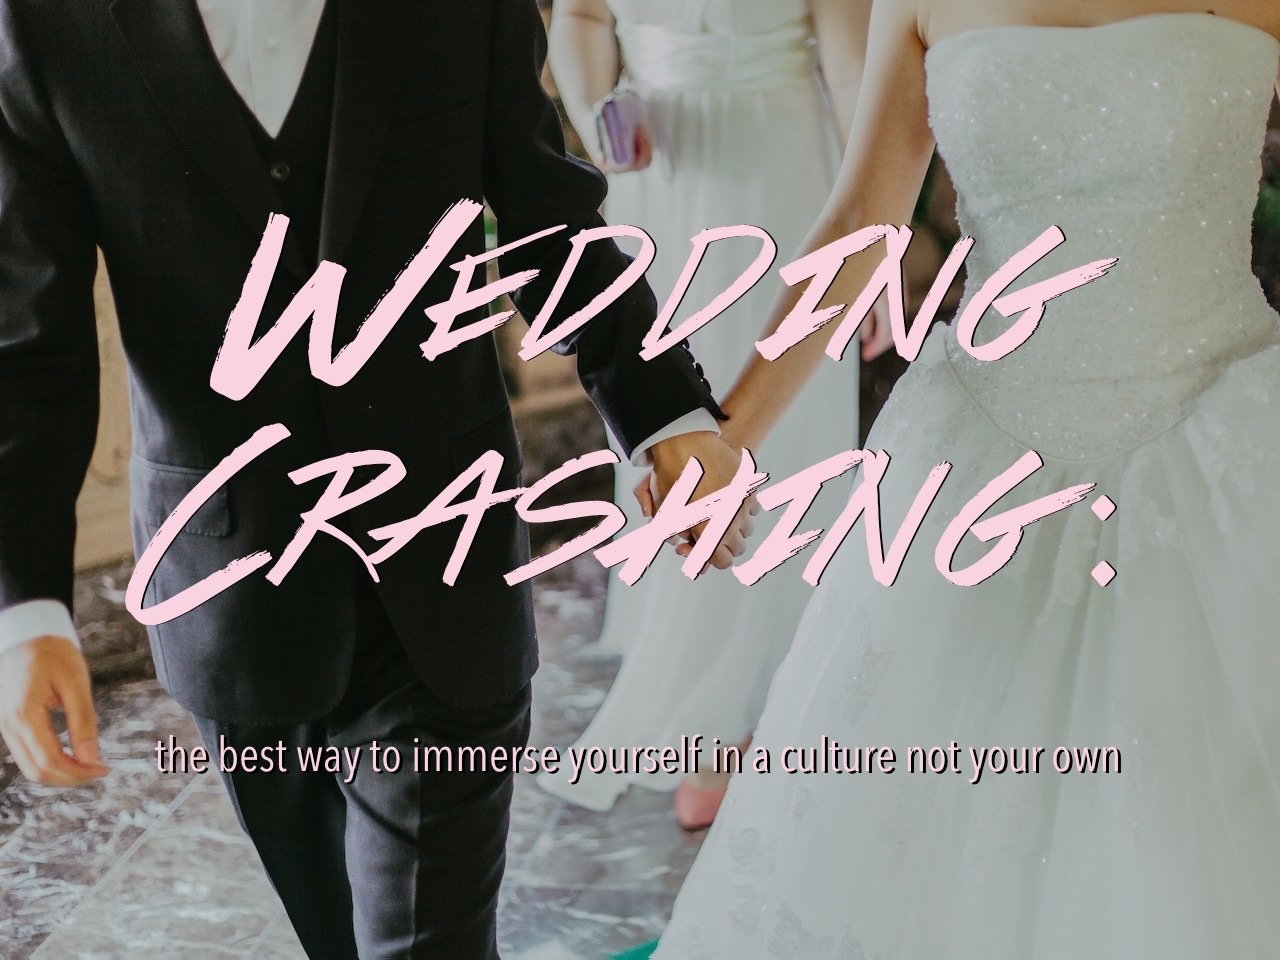 Wedding crashing: The best way to immerse yourself in a culture not your  own - The Sharonicles